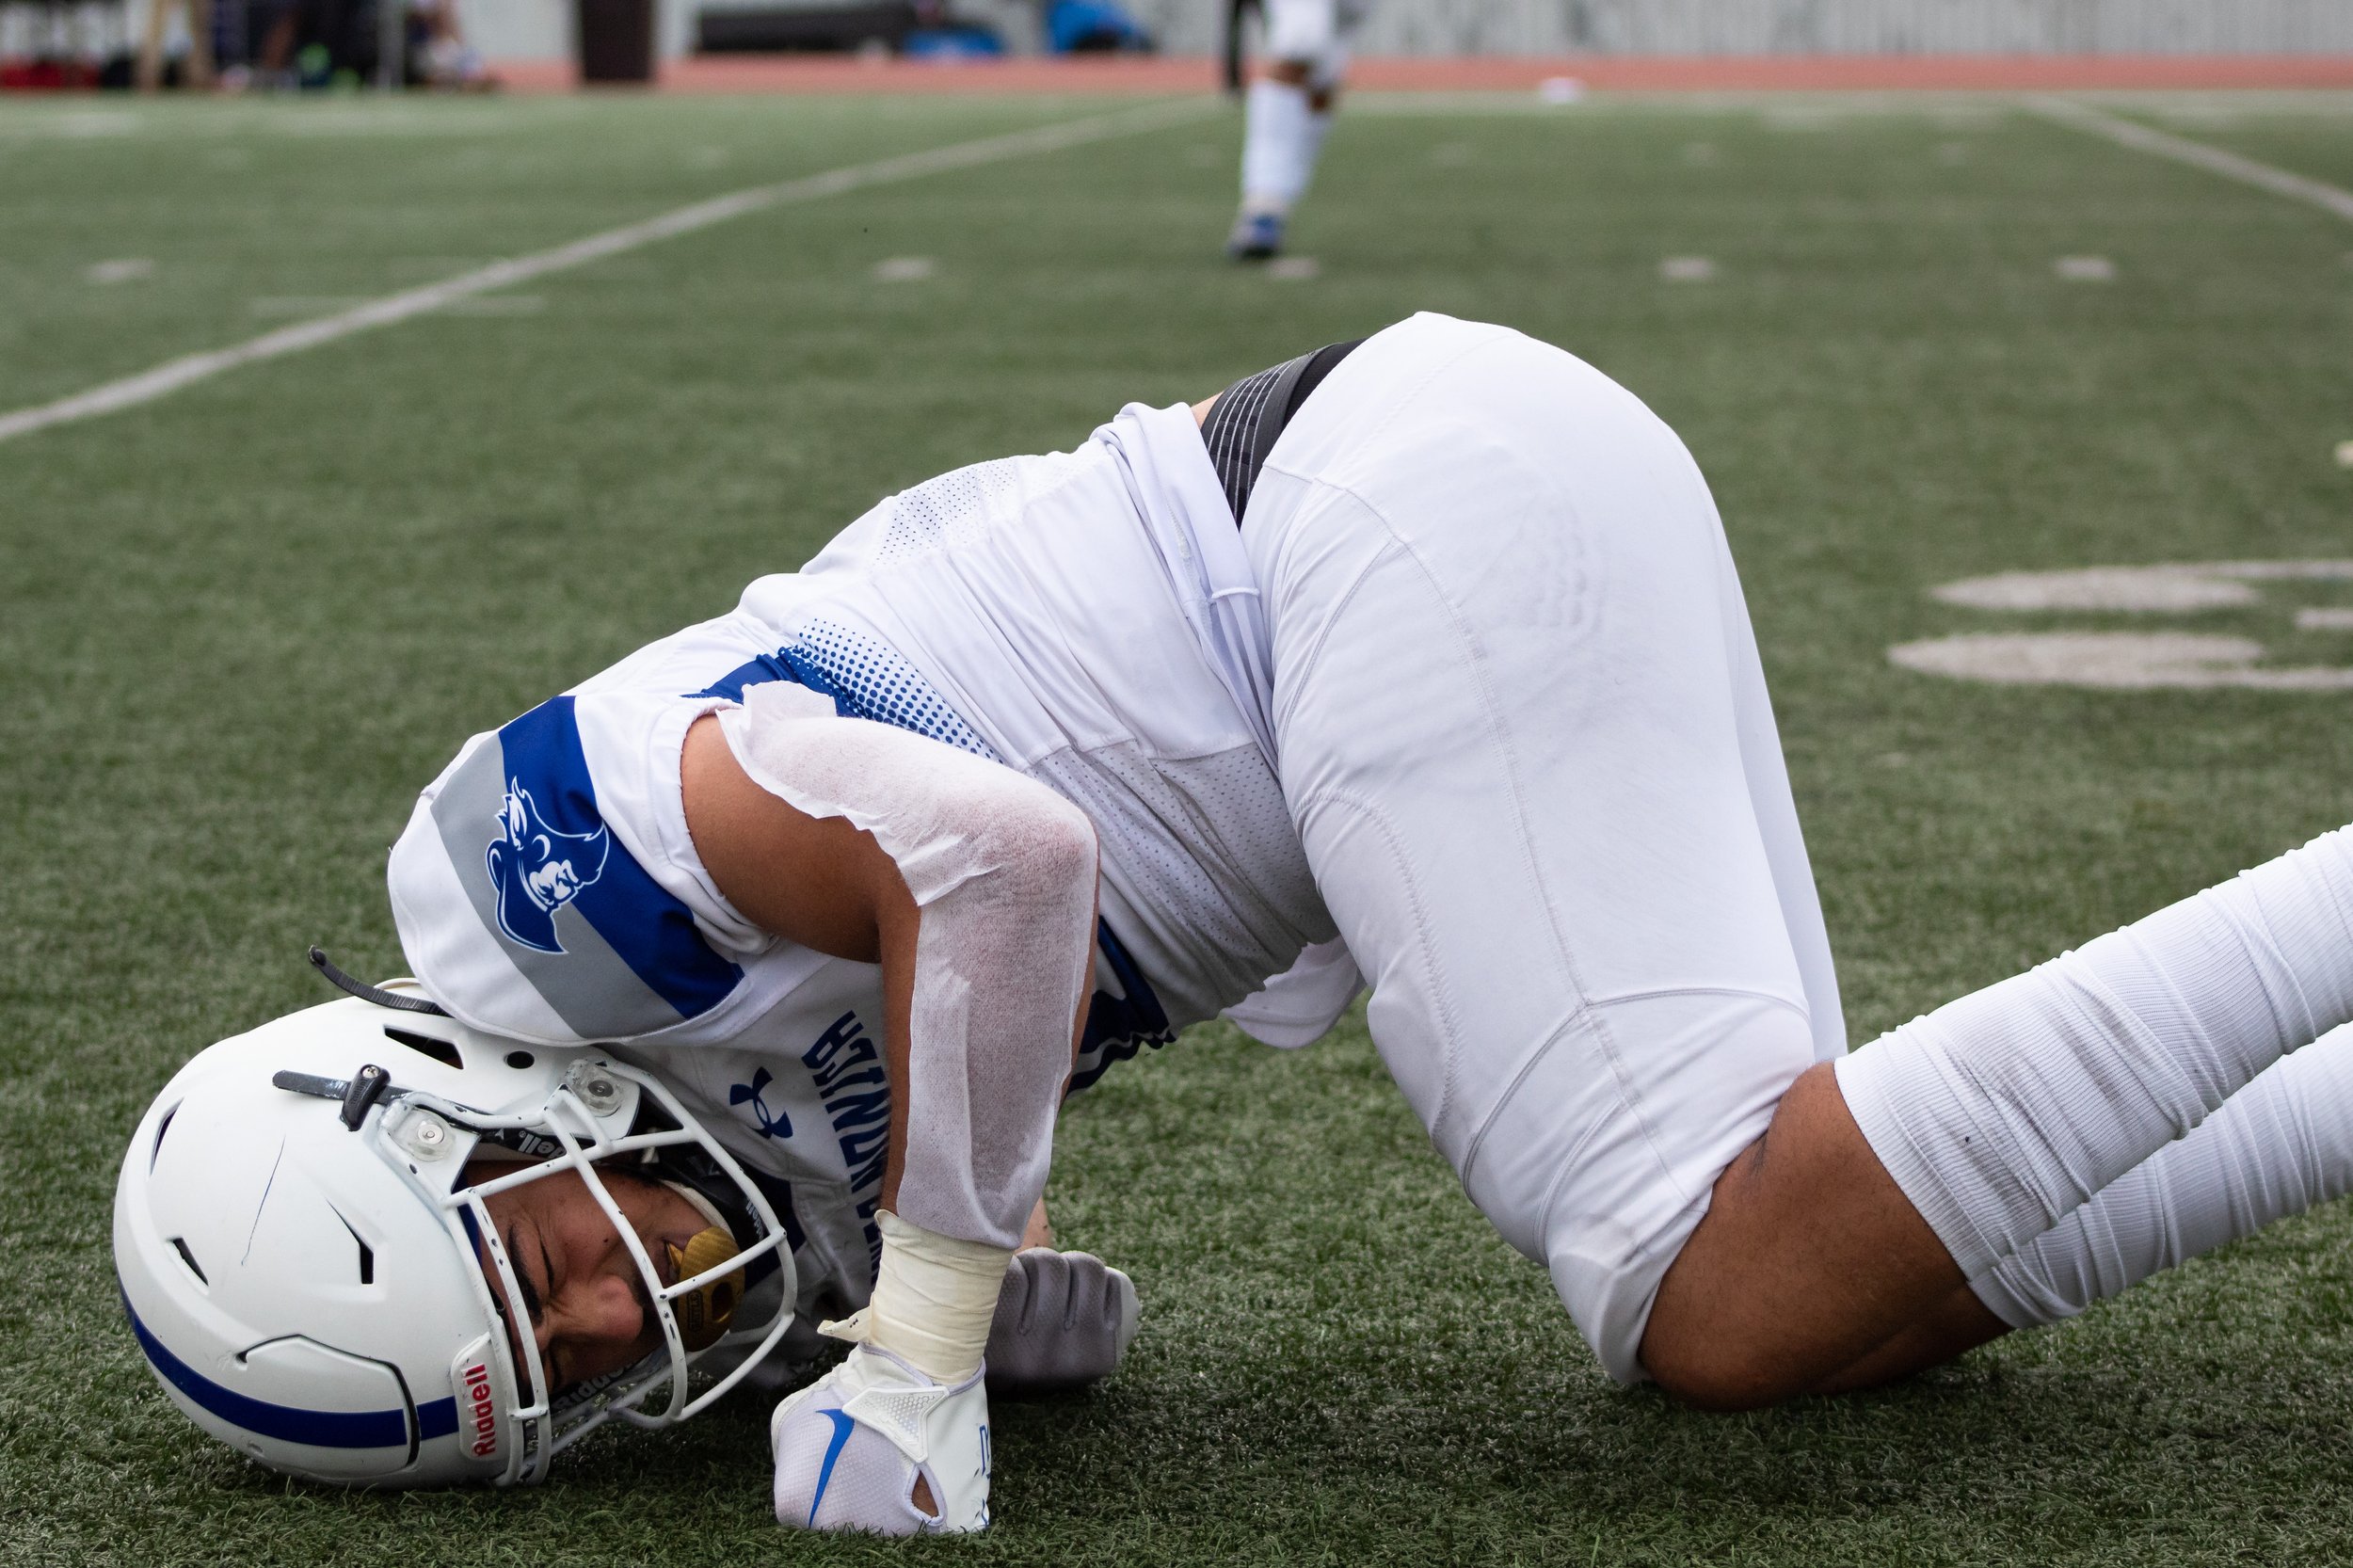  The Corsair's LJ Holmes taking a moment after being tackled during a home football game against Pasadena City's Lancers. The Lancers won with a final score of 27-20, on September 10, 2022, at Santa Monica College, Santa Monica, Calif. (Caylo Seals |